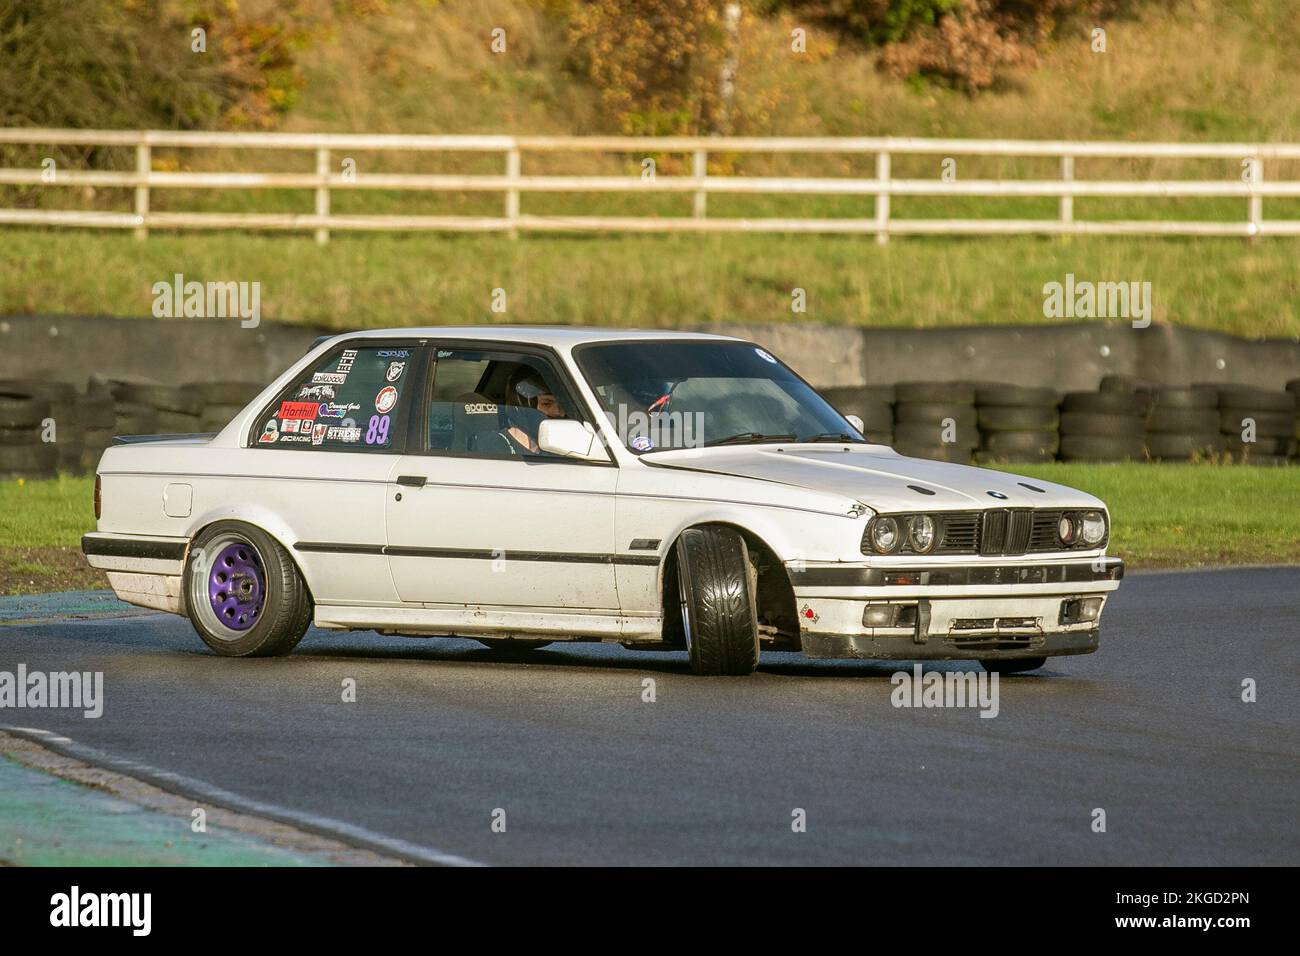 White BMW 316i 2dr saloon 1596cc; E30 3-series Rear-wheel-drive car, driving on drift tracks and high-speed cornering on wet roads on a Three Sisters Drift Day in Wigan, UK Stock Photo